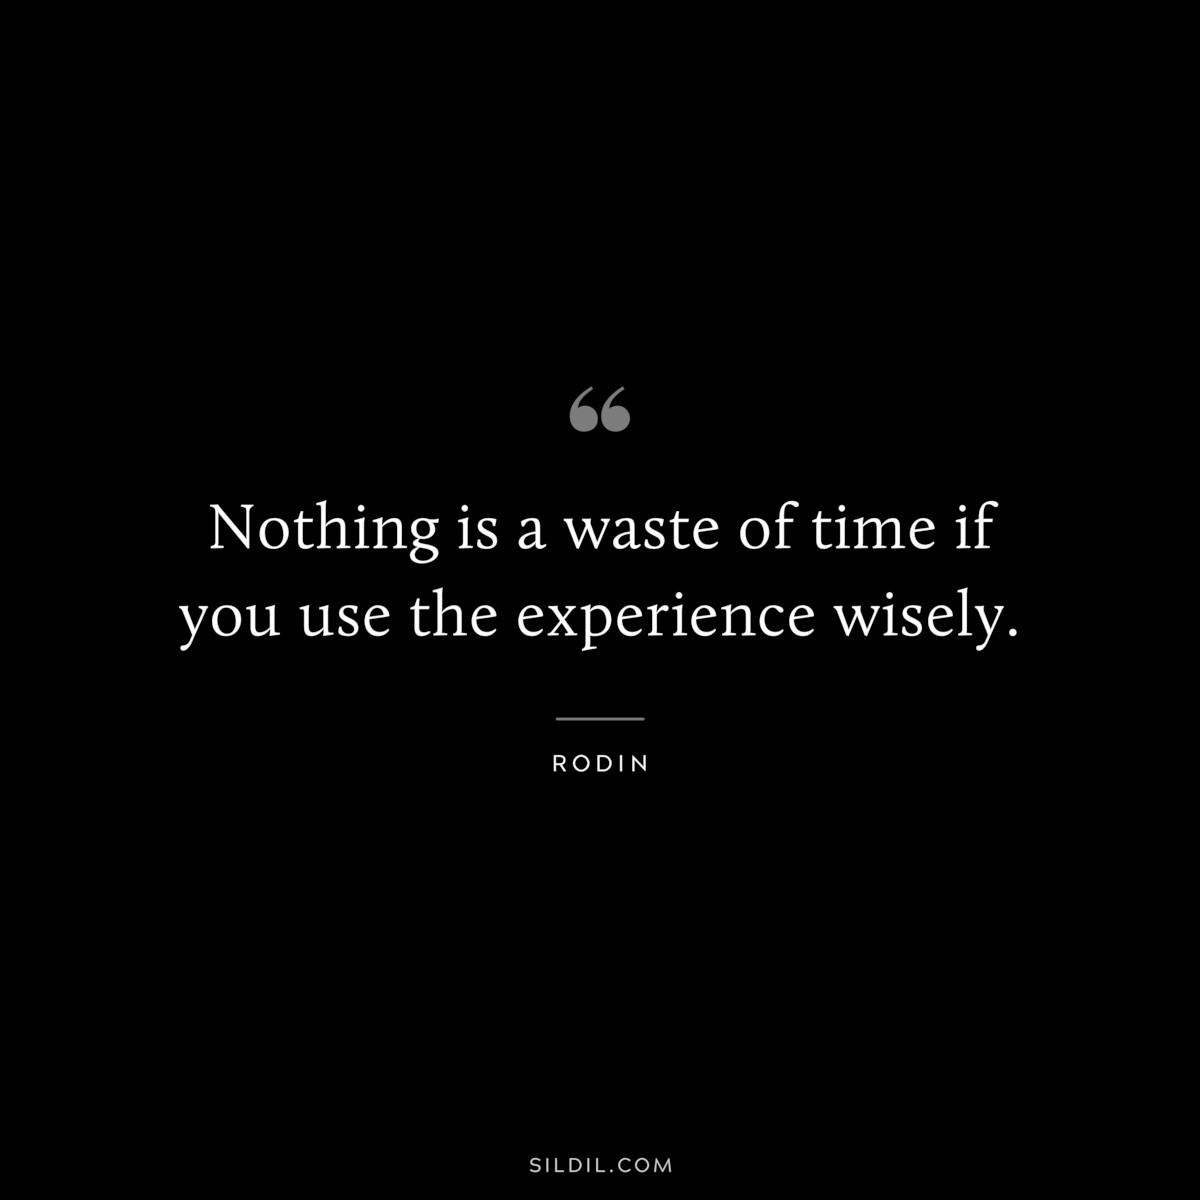 Nothing is a waste of time if you use the experience wisely. ― Rodin